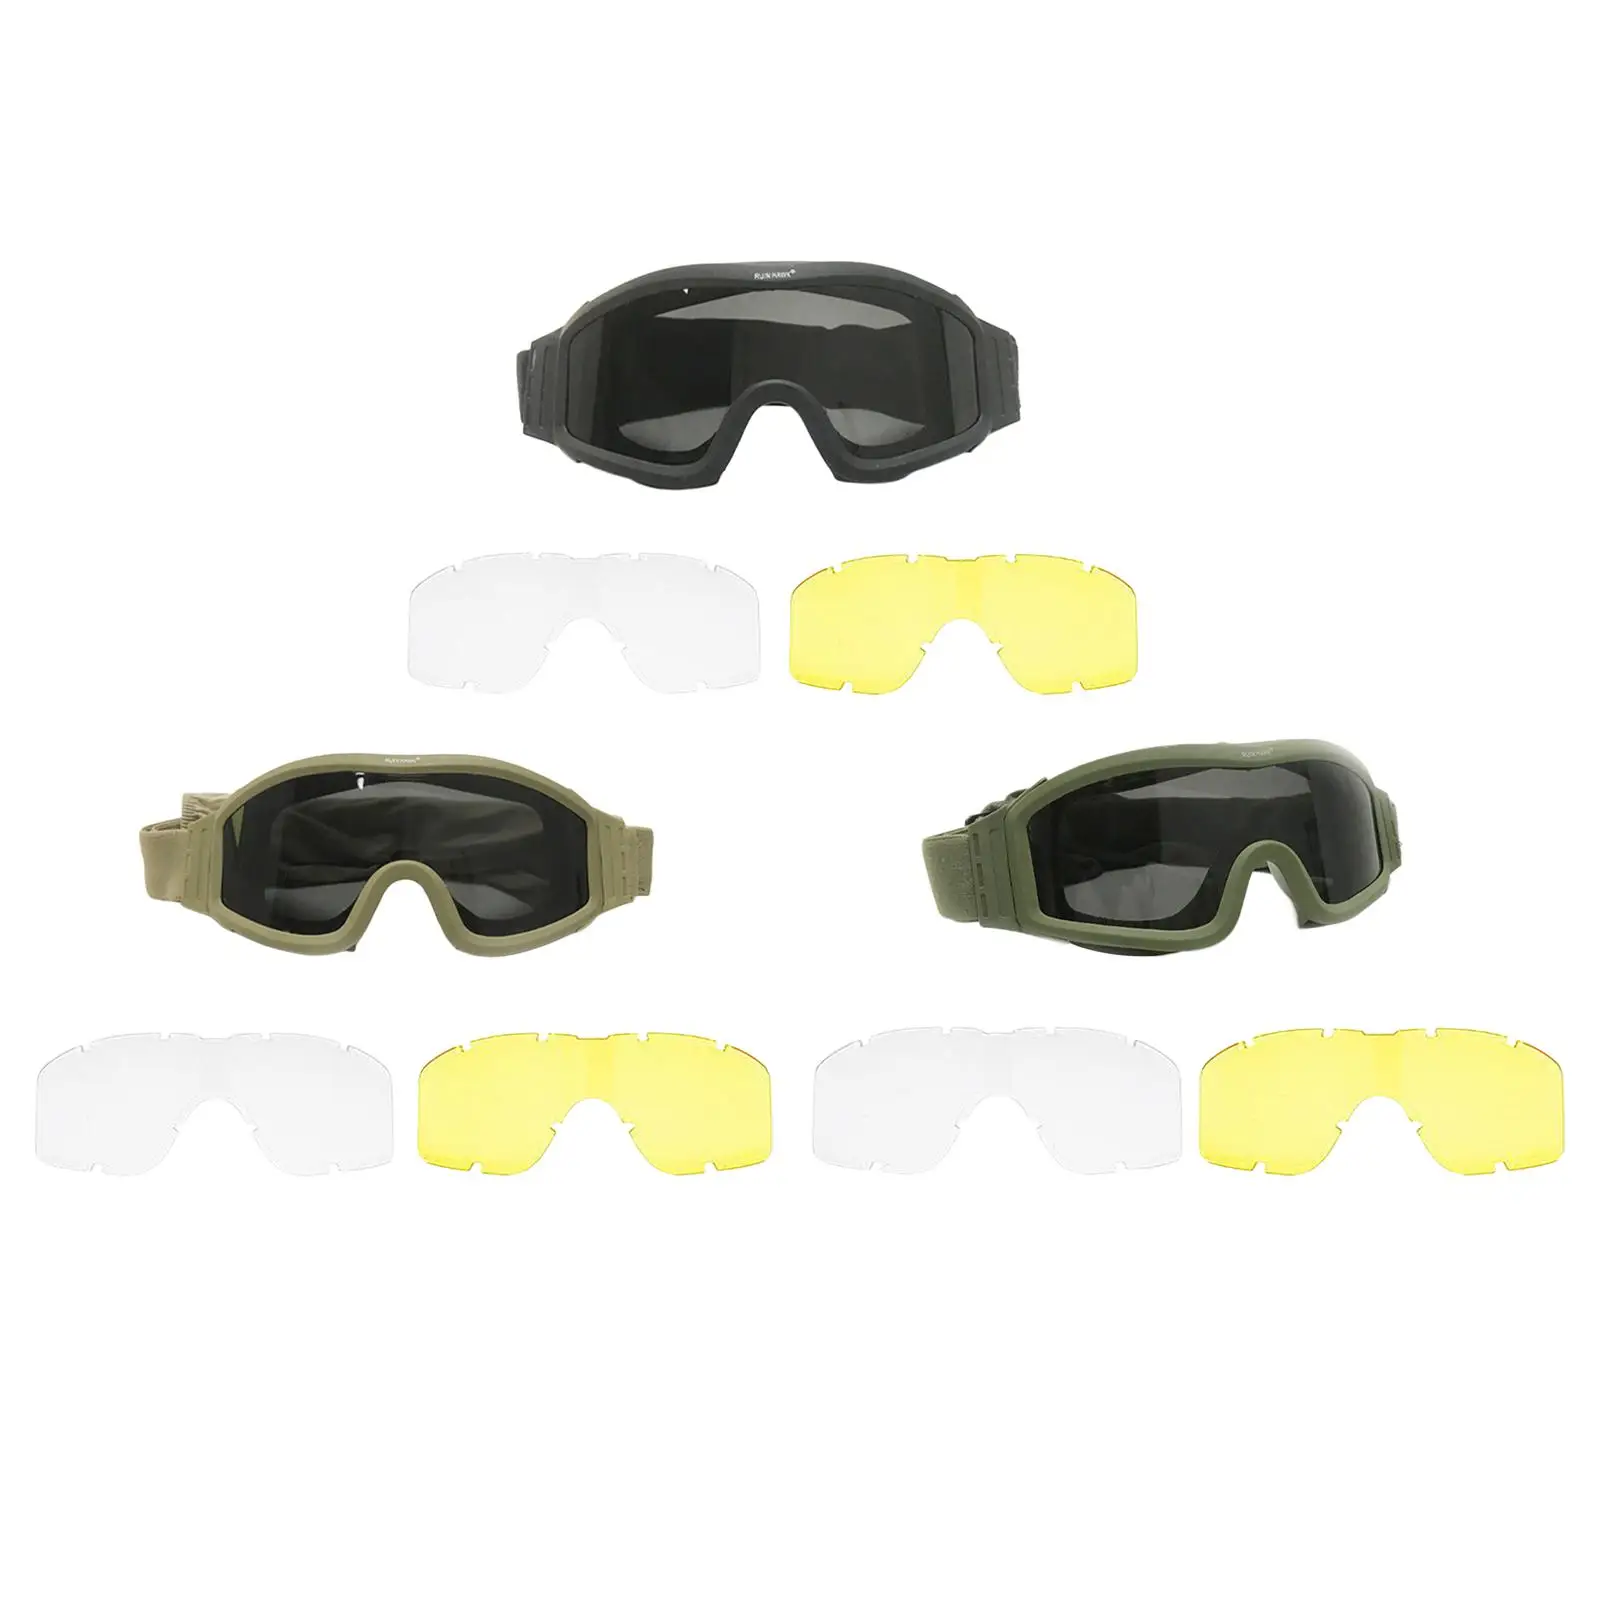 3 Lens Motorcycle Goggles Protective Outdoor for Desert Biking Hiking 